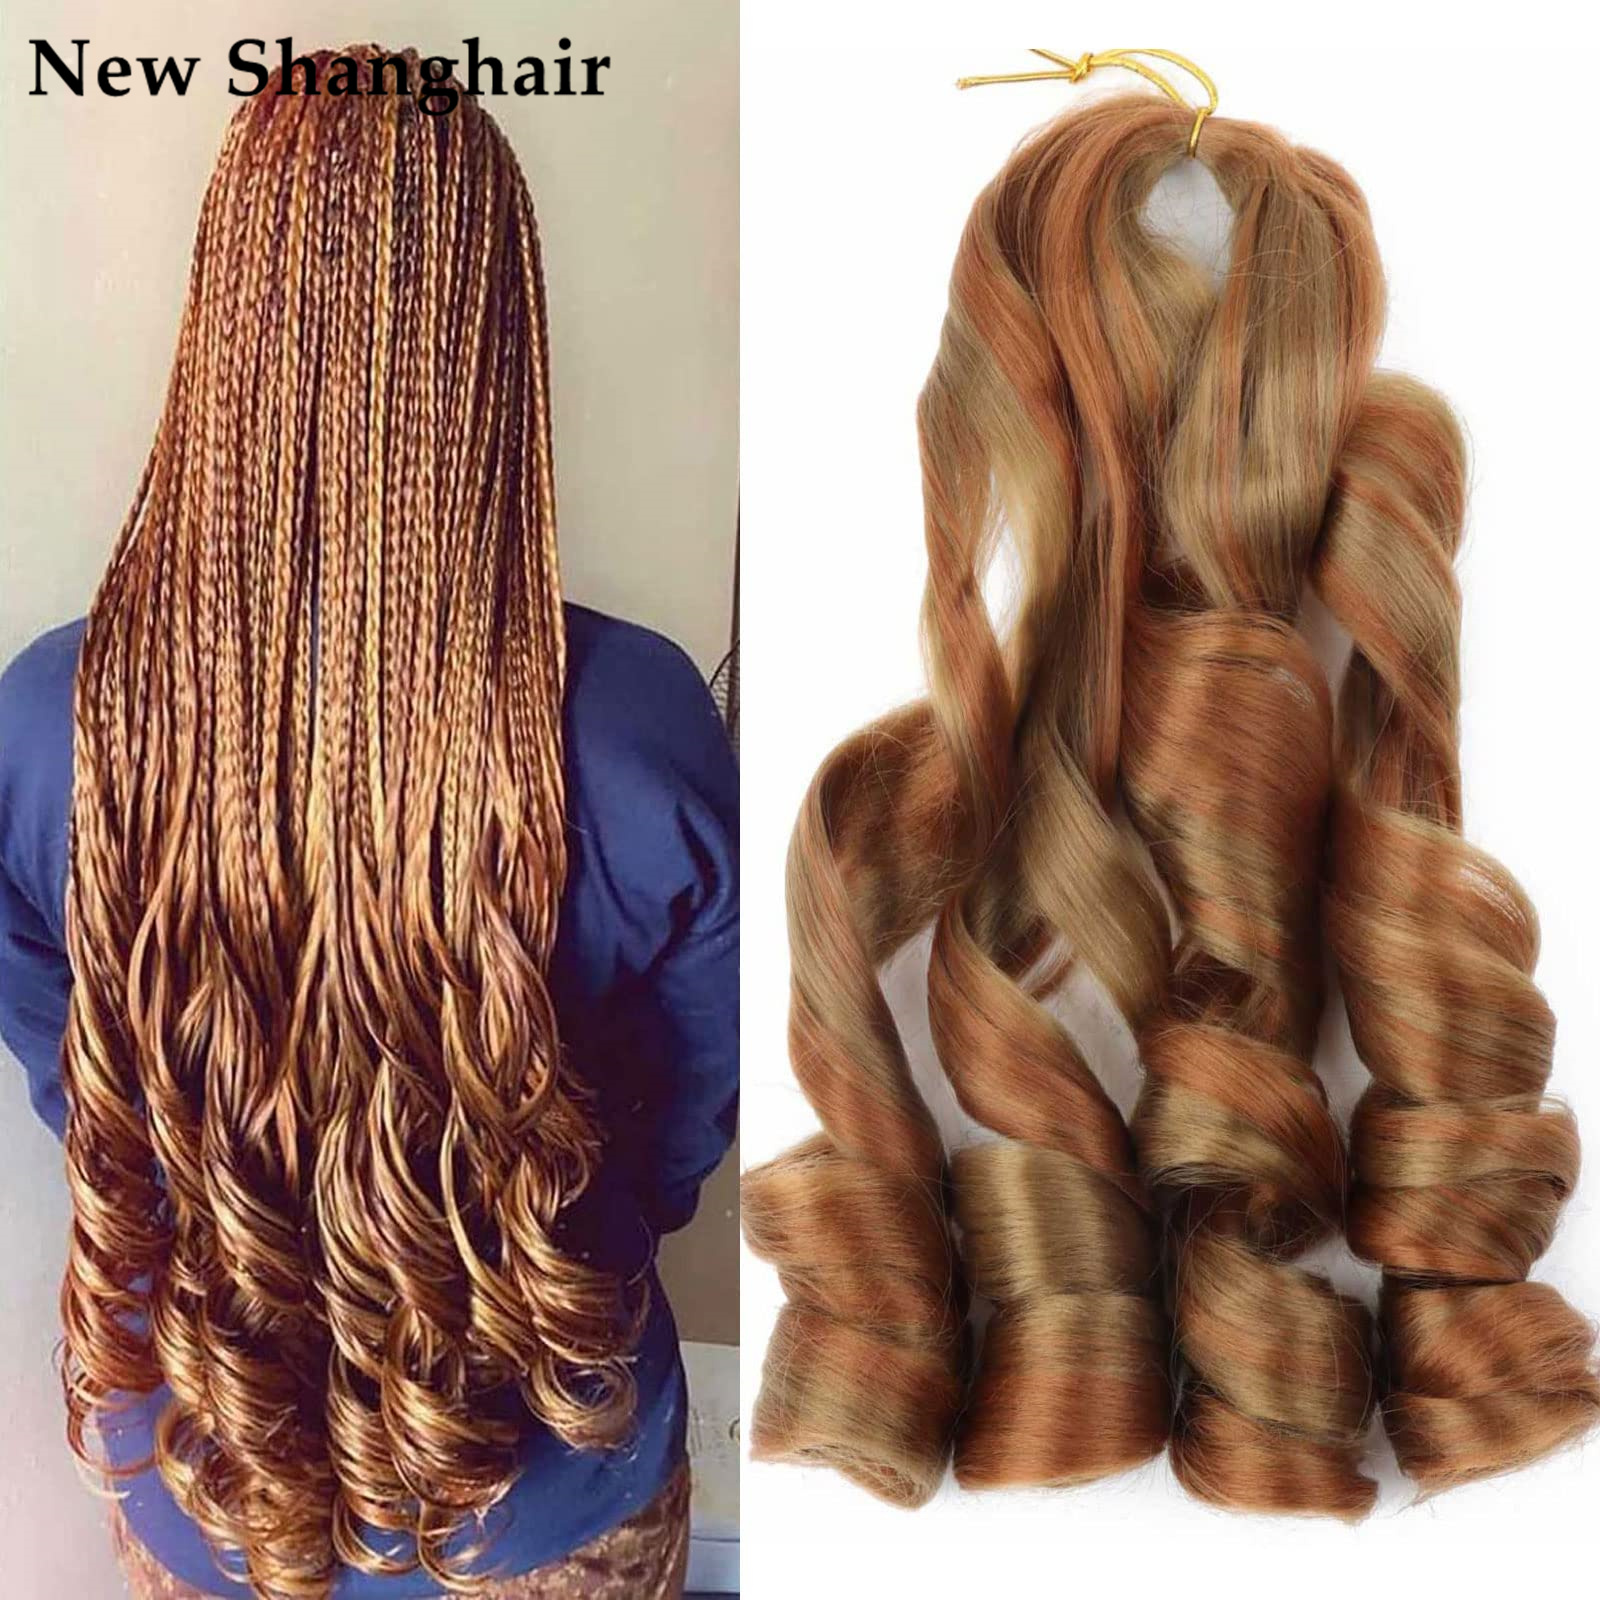 

New Shanghair 22" Synthetic Loose Wave Spiral Curl Braid Hair Ombre Pre Stretched Crochet Braiding Hair Extensions for Women French Curls BS04, 1b